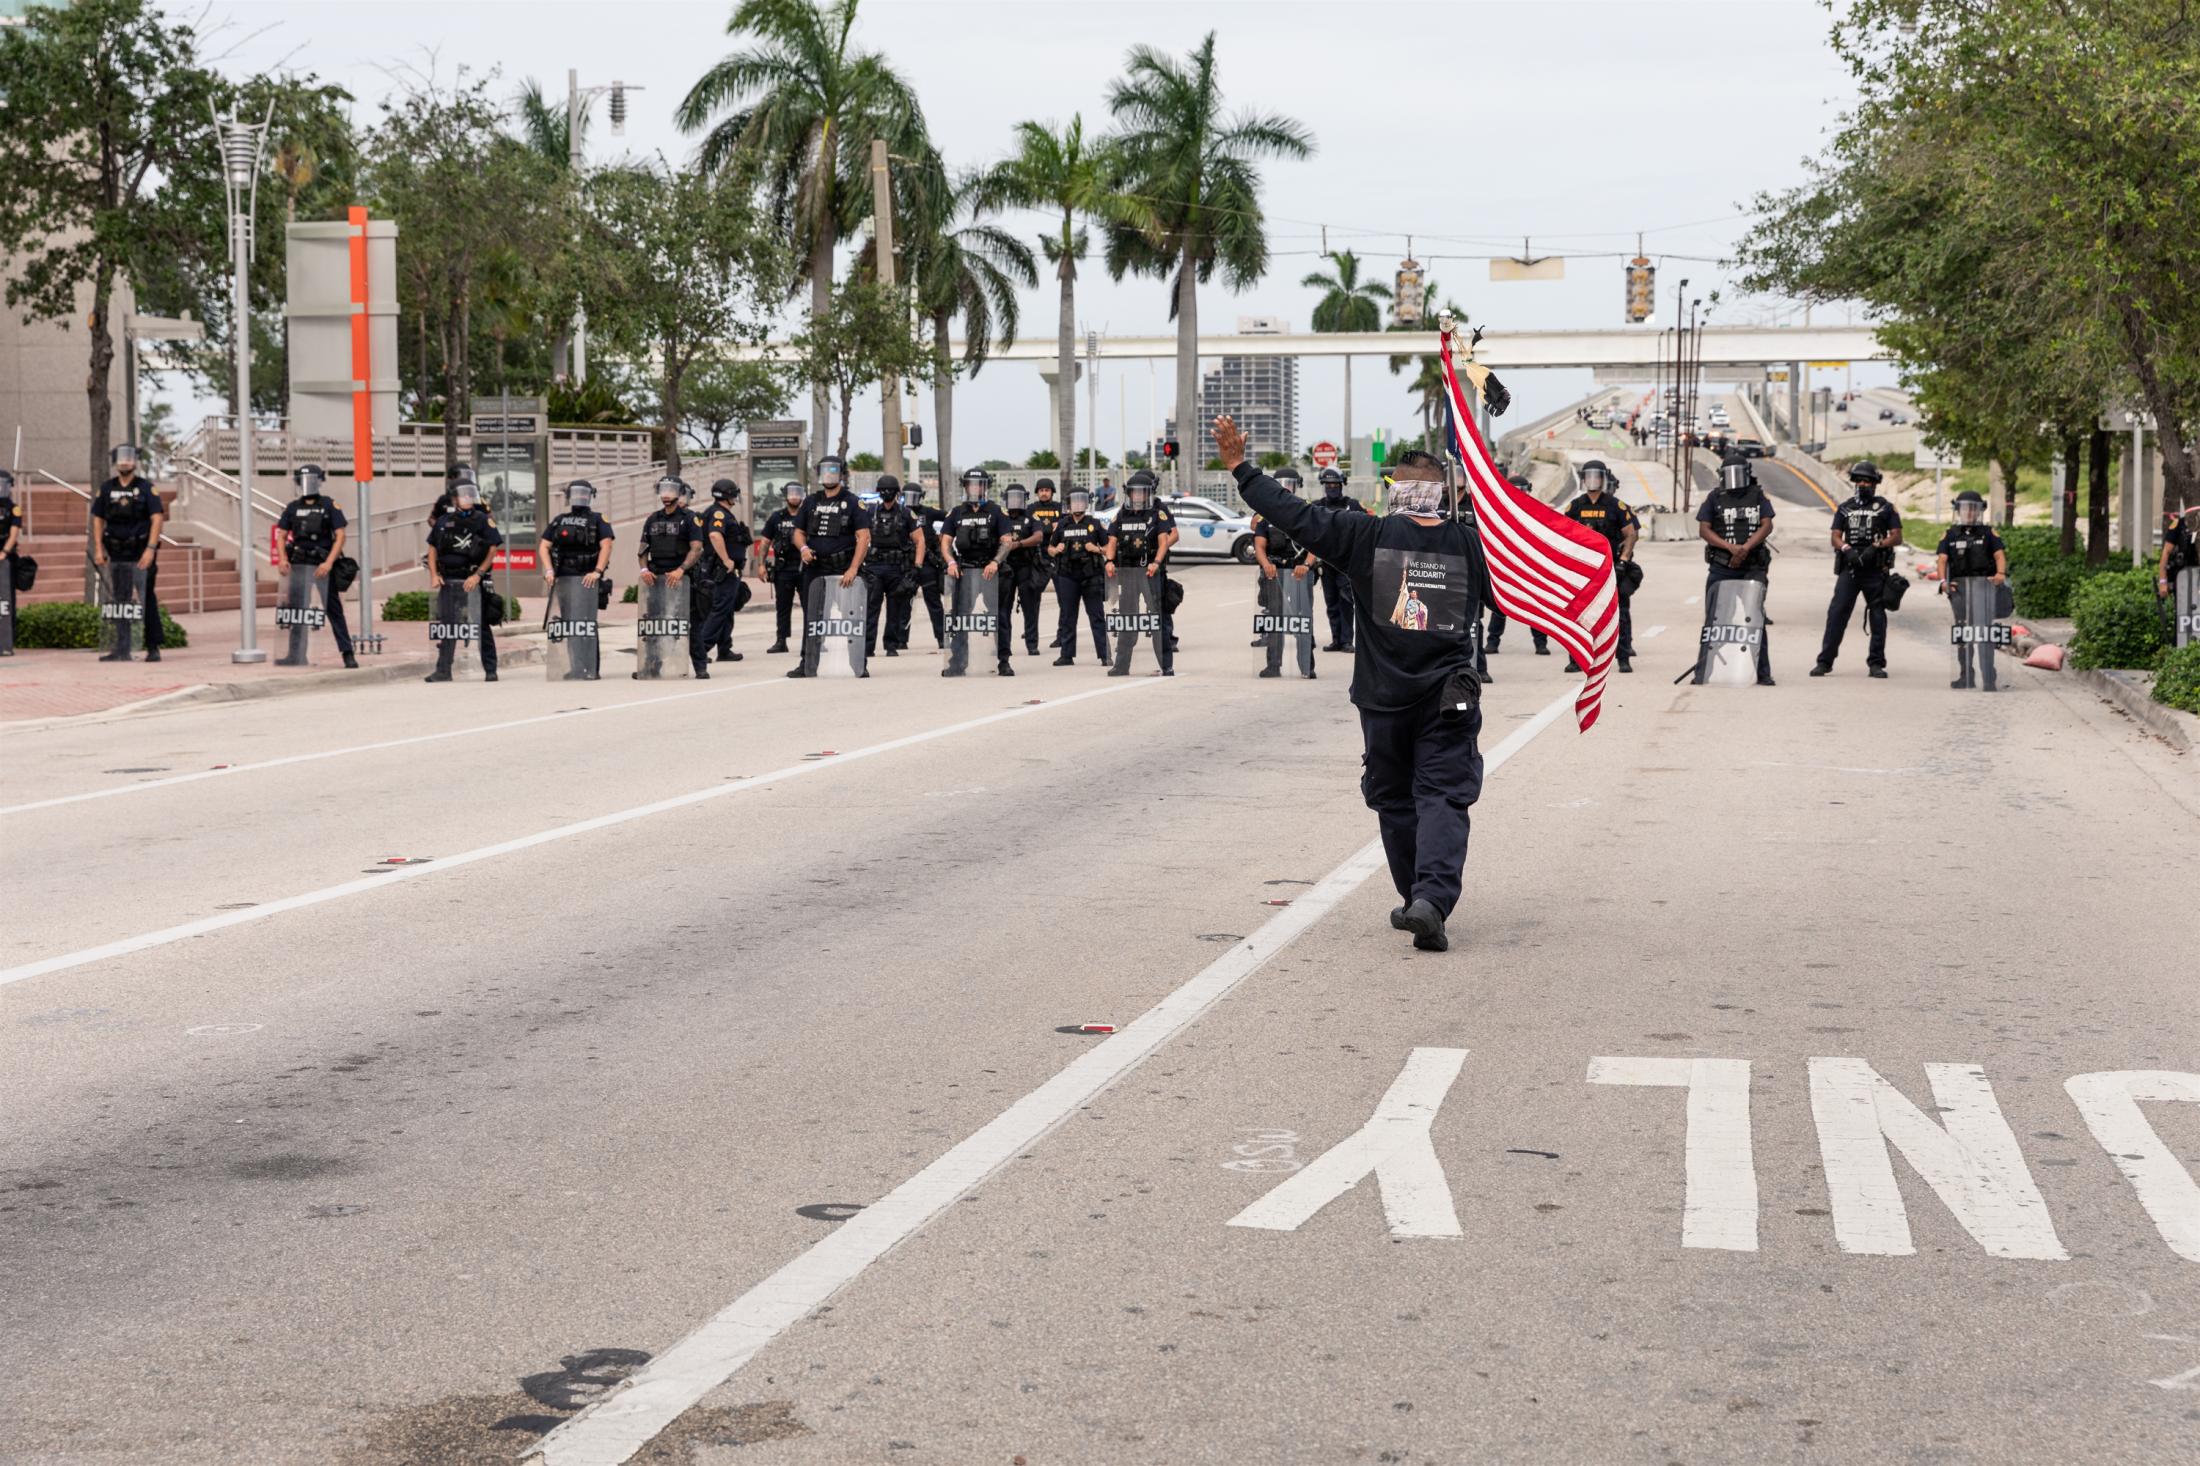 Miami, Black Lives Matter Protests - BLM Protest on Biscayne Blvd, Miami, Florida June 6, 2020 A Native American protestor approaches...